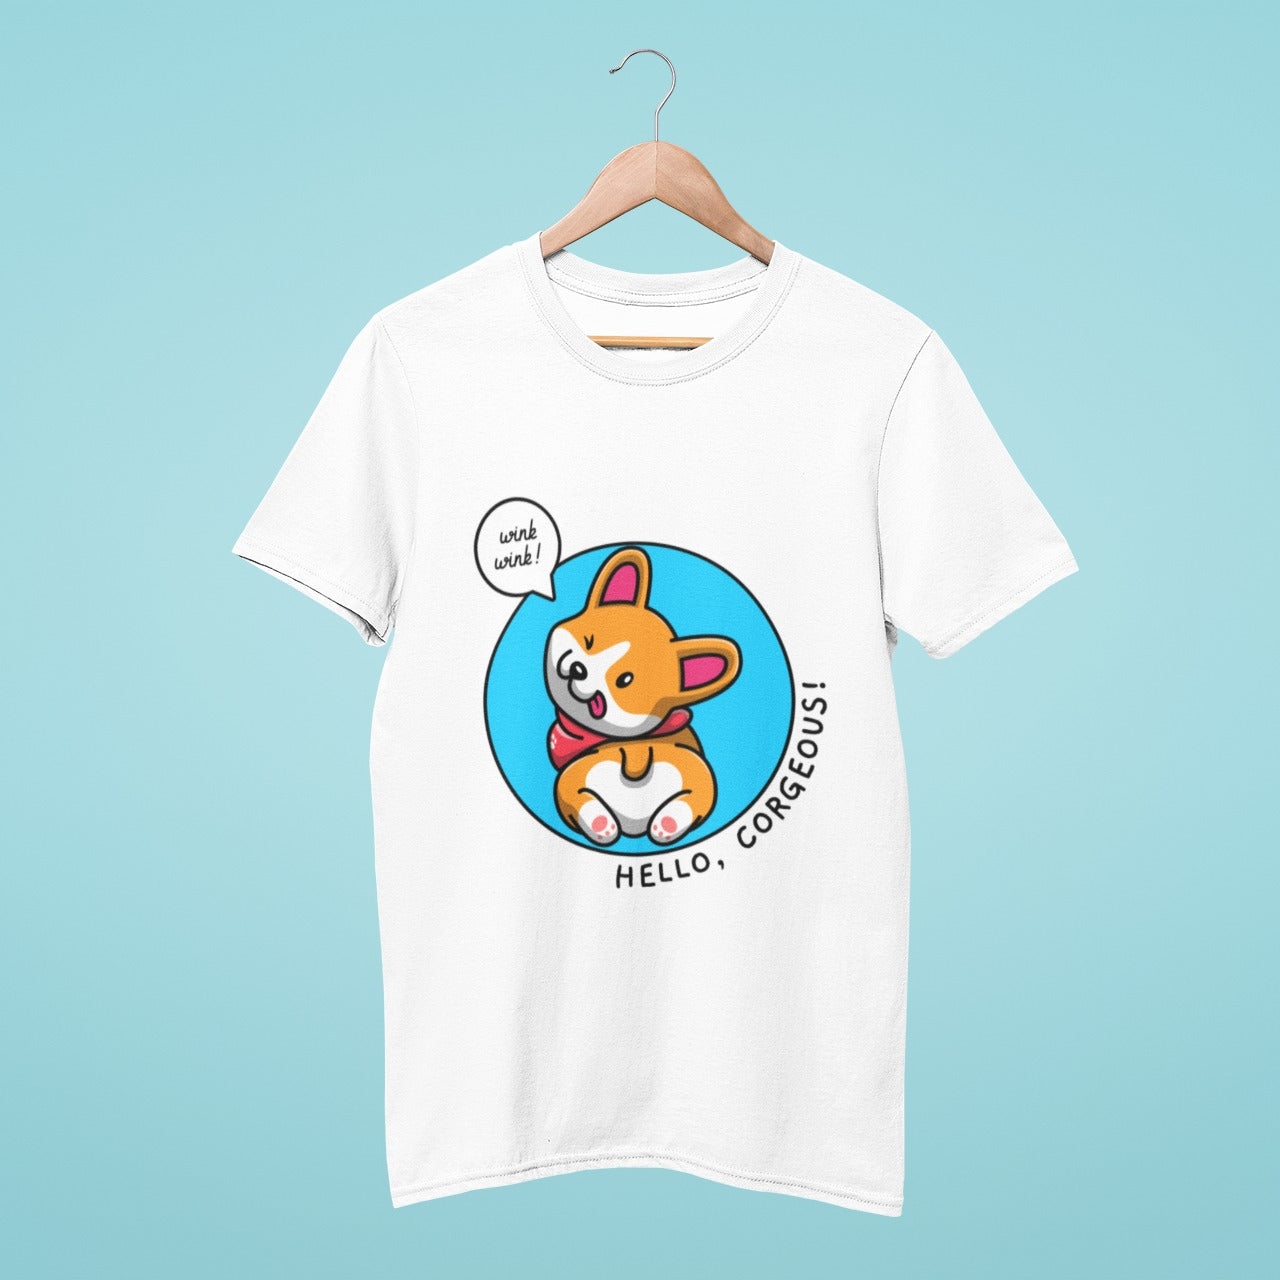 This white t-shirt features a cute cartoon corgi with its back turned, showing off its butt, and winking with a speech bubble that says "wink wink!" The caption "Hello, Corg-eous!" adds a playful touch. Perfect for corgi lovers who appreciate a bit of humor in their wardrobe.